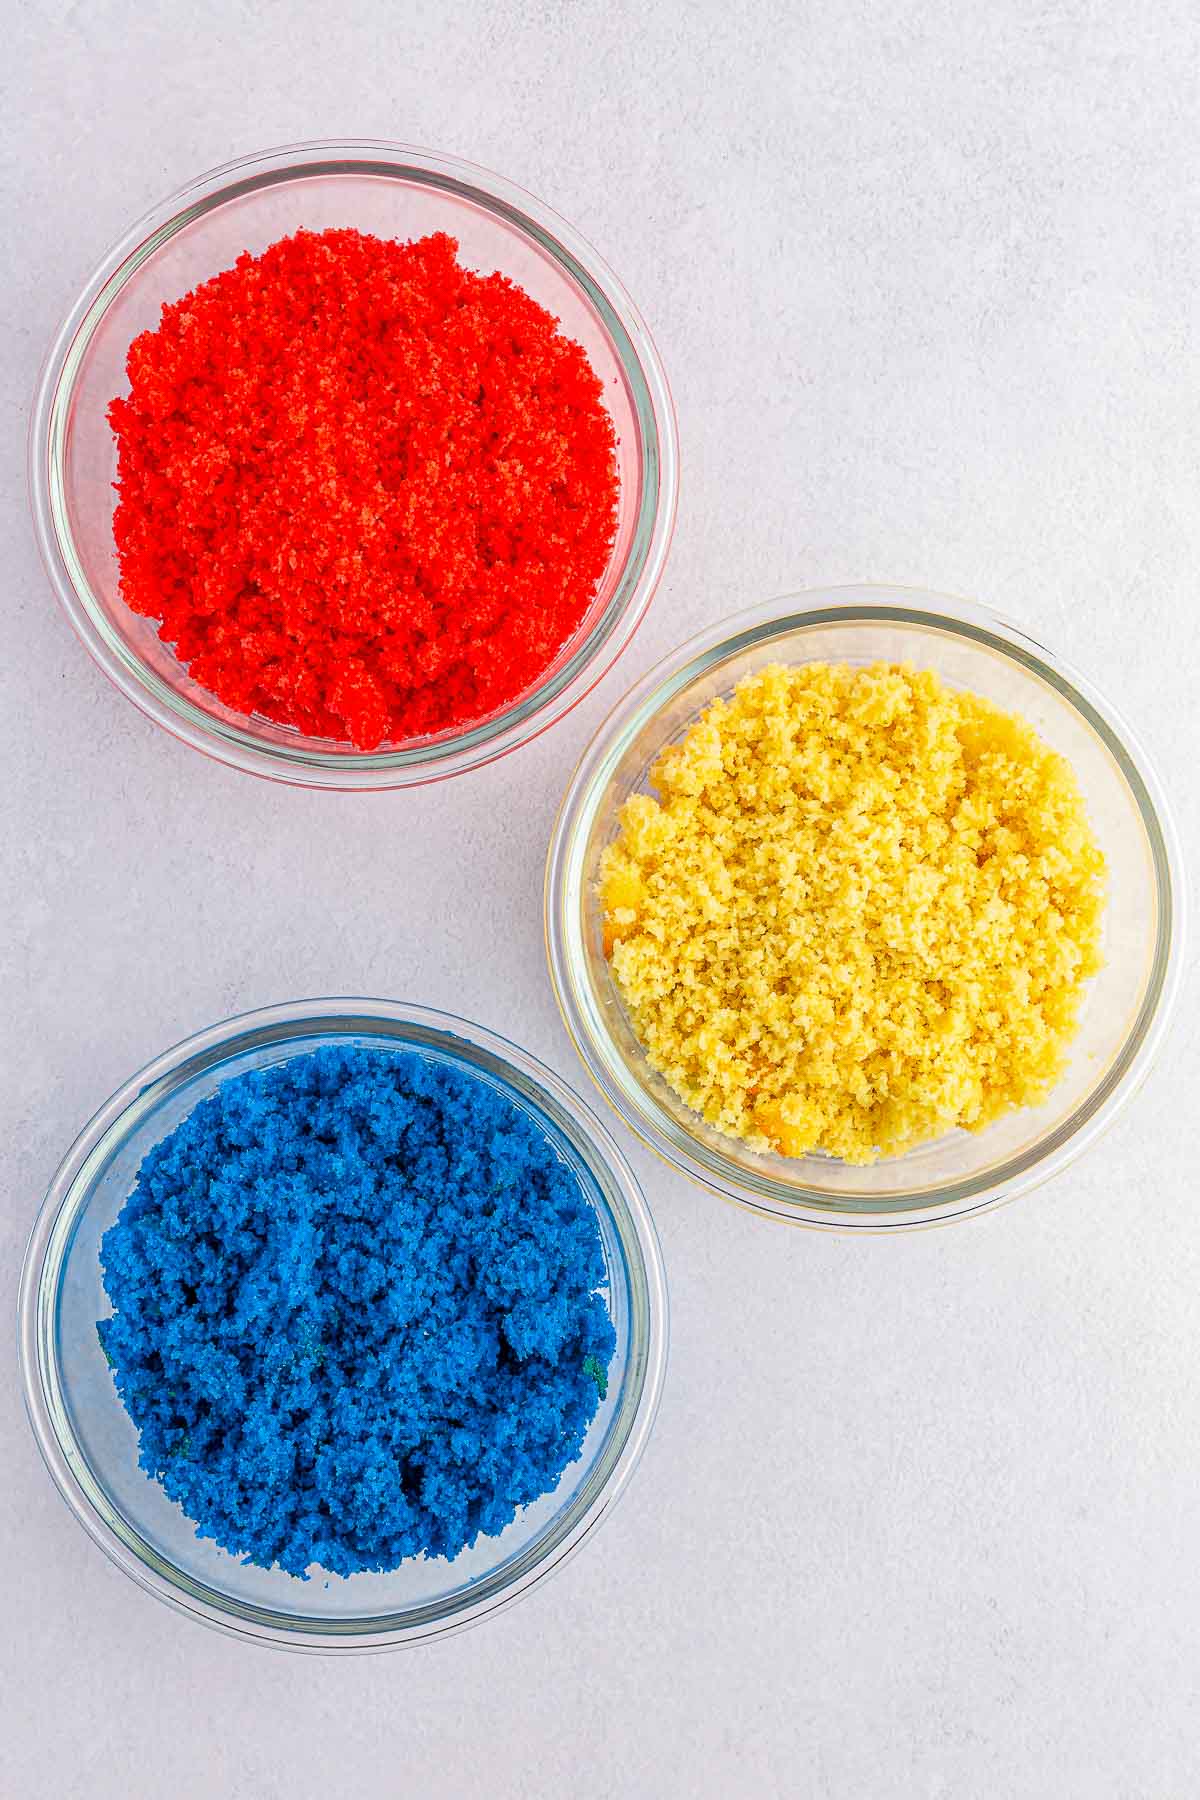 three glass bowls of crumbled cake batter. one blue, one red and one white.